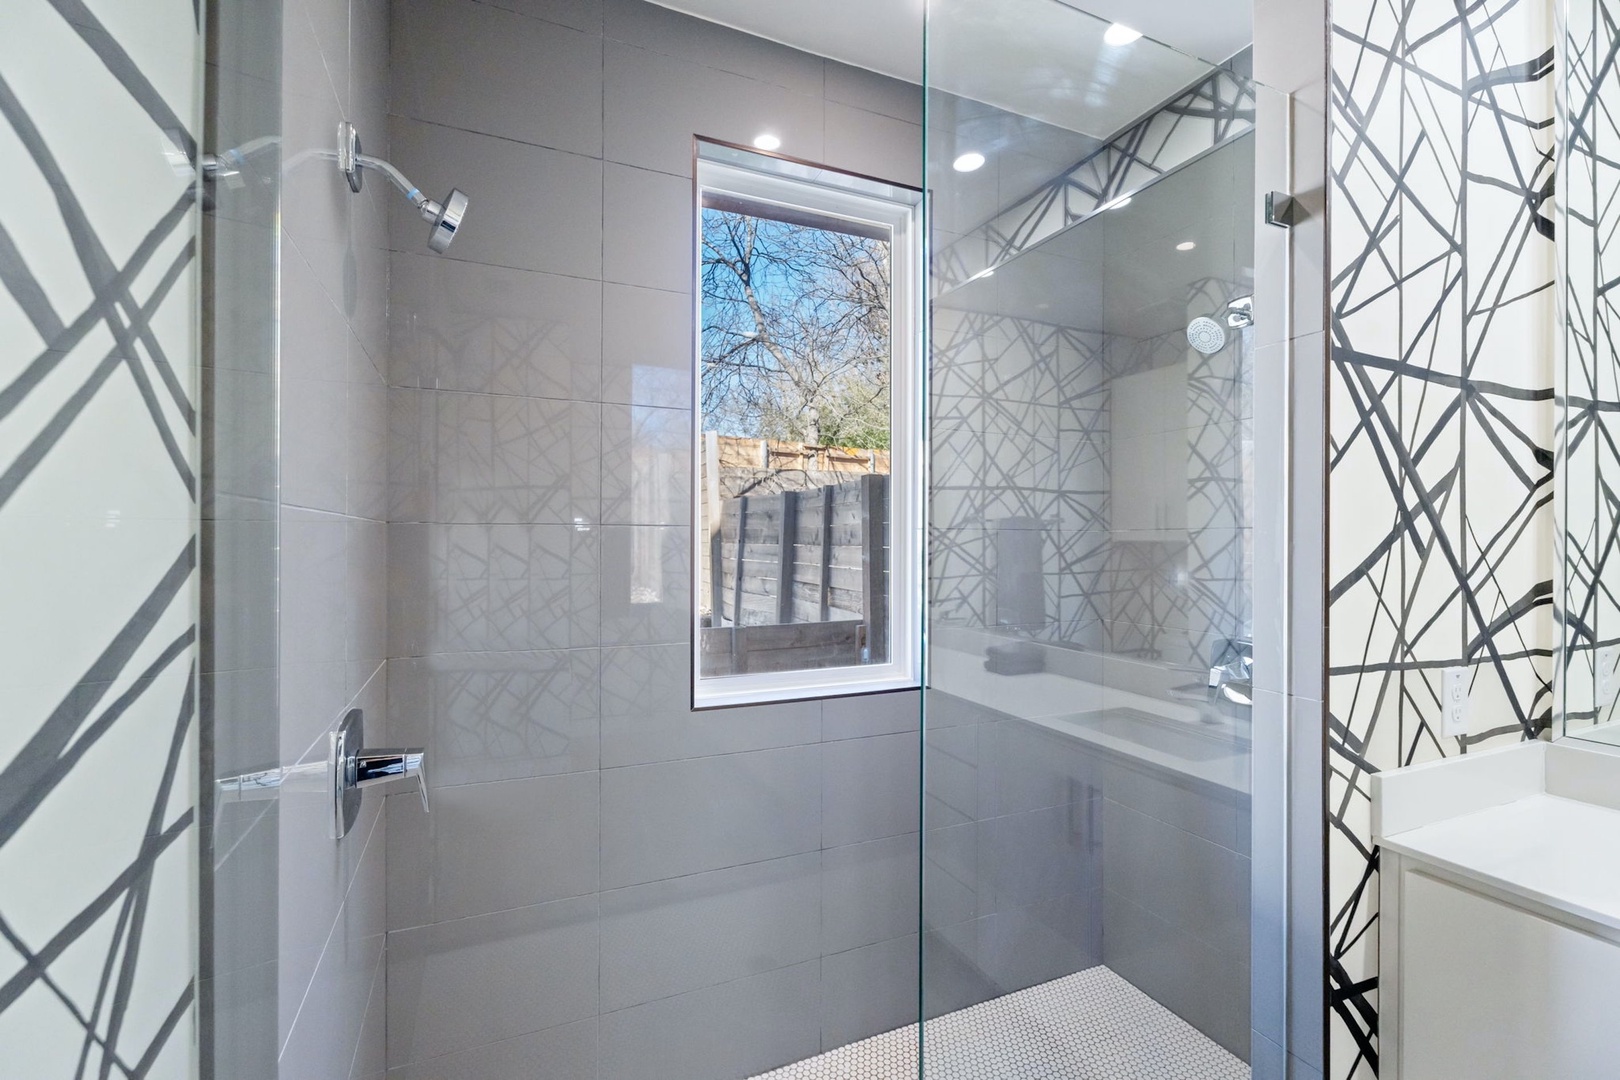 The primary ensuite on the main floor includes a dual vanity & glass shower